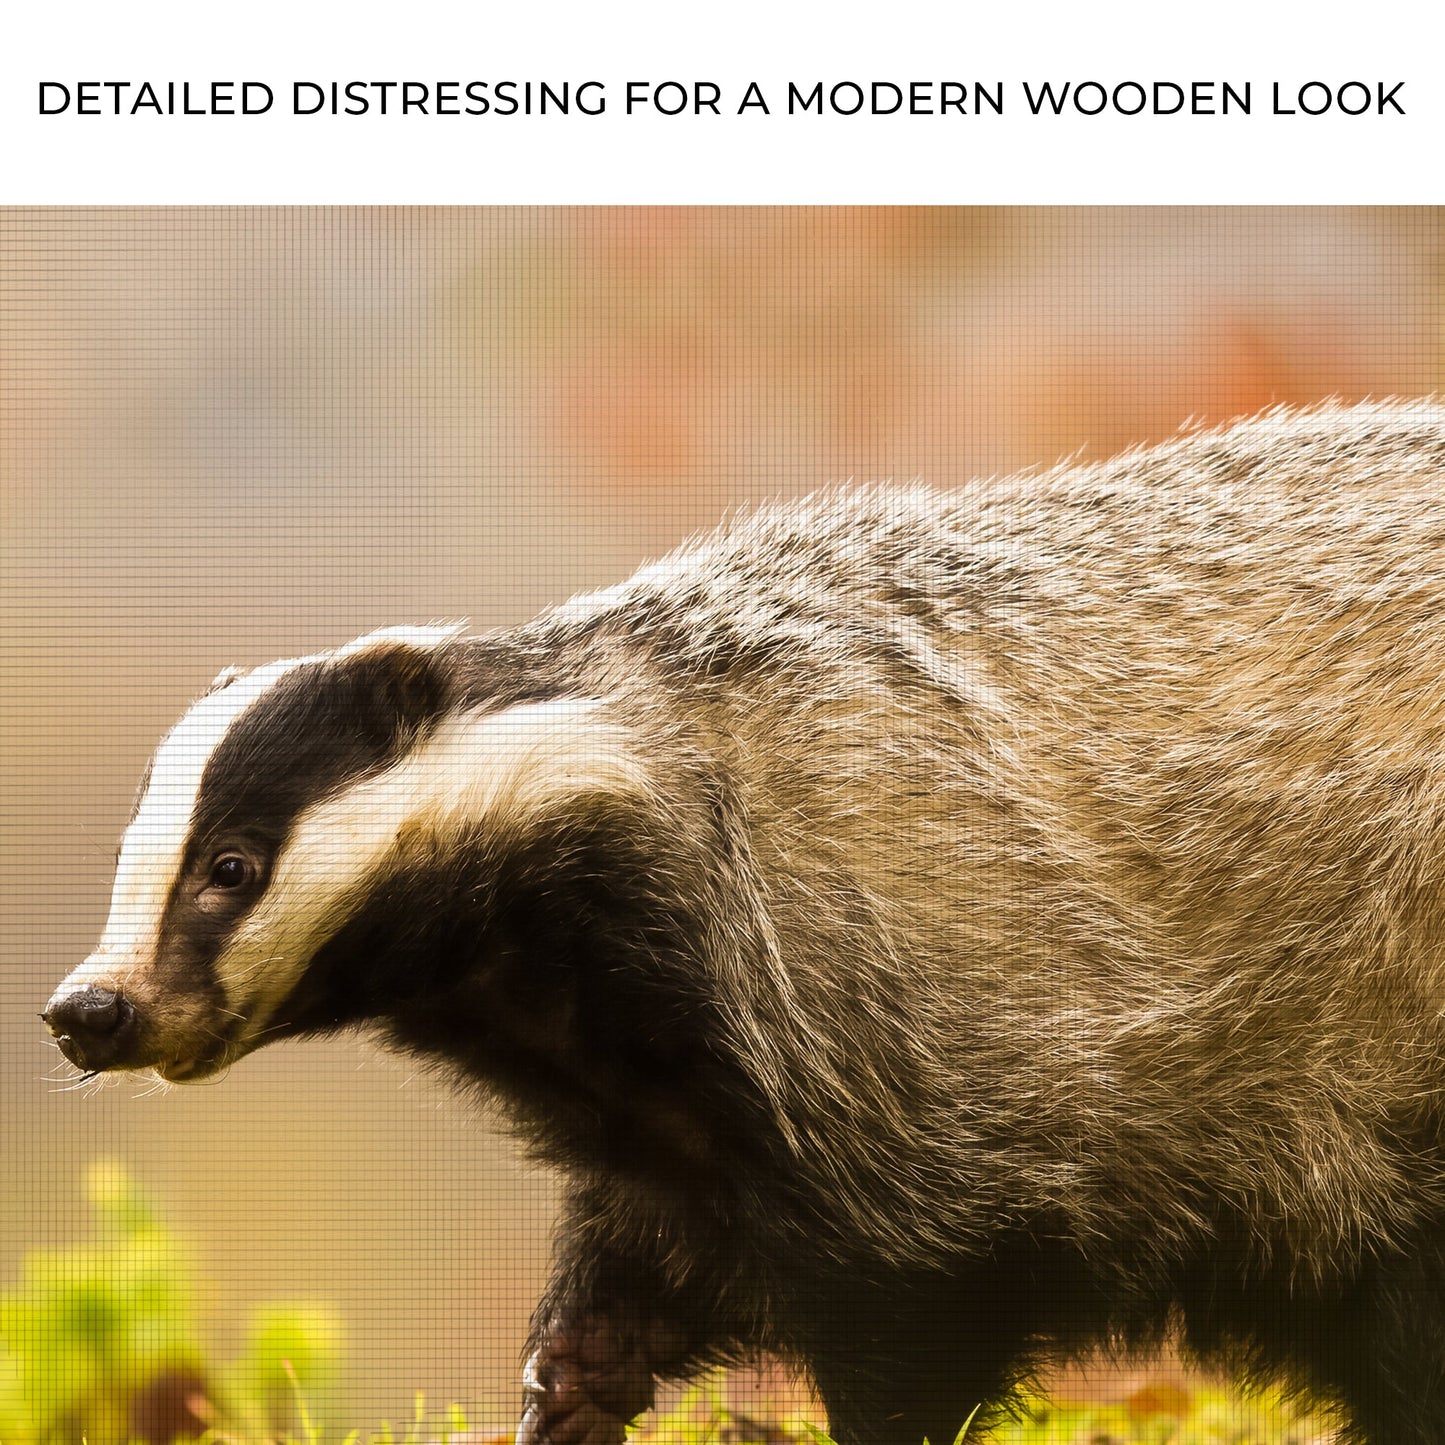 Forest-Dwelling Badger and Apple Harvest Canvas